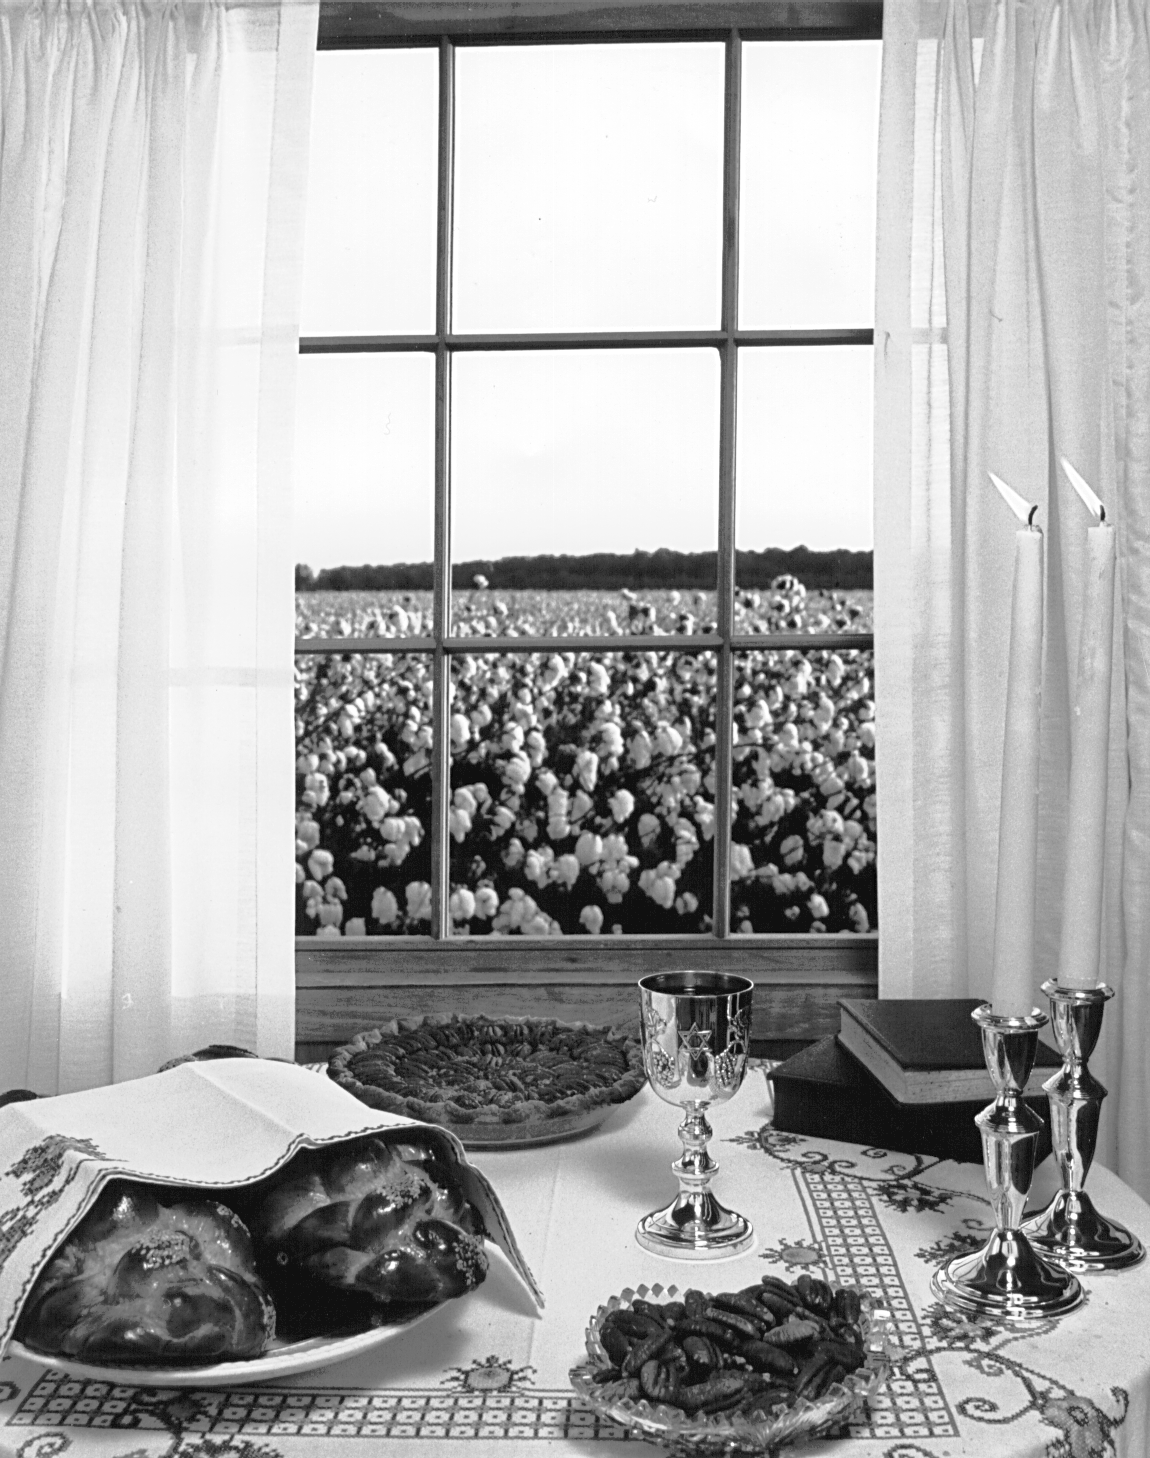 "Shabbat Cotton." Photo by Bill Aron. Courtesy Goldring/Woldenberg Institute of Southern Jewish Life. Do not reprint without permission.